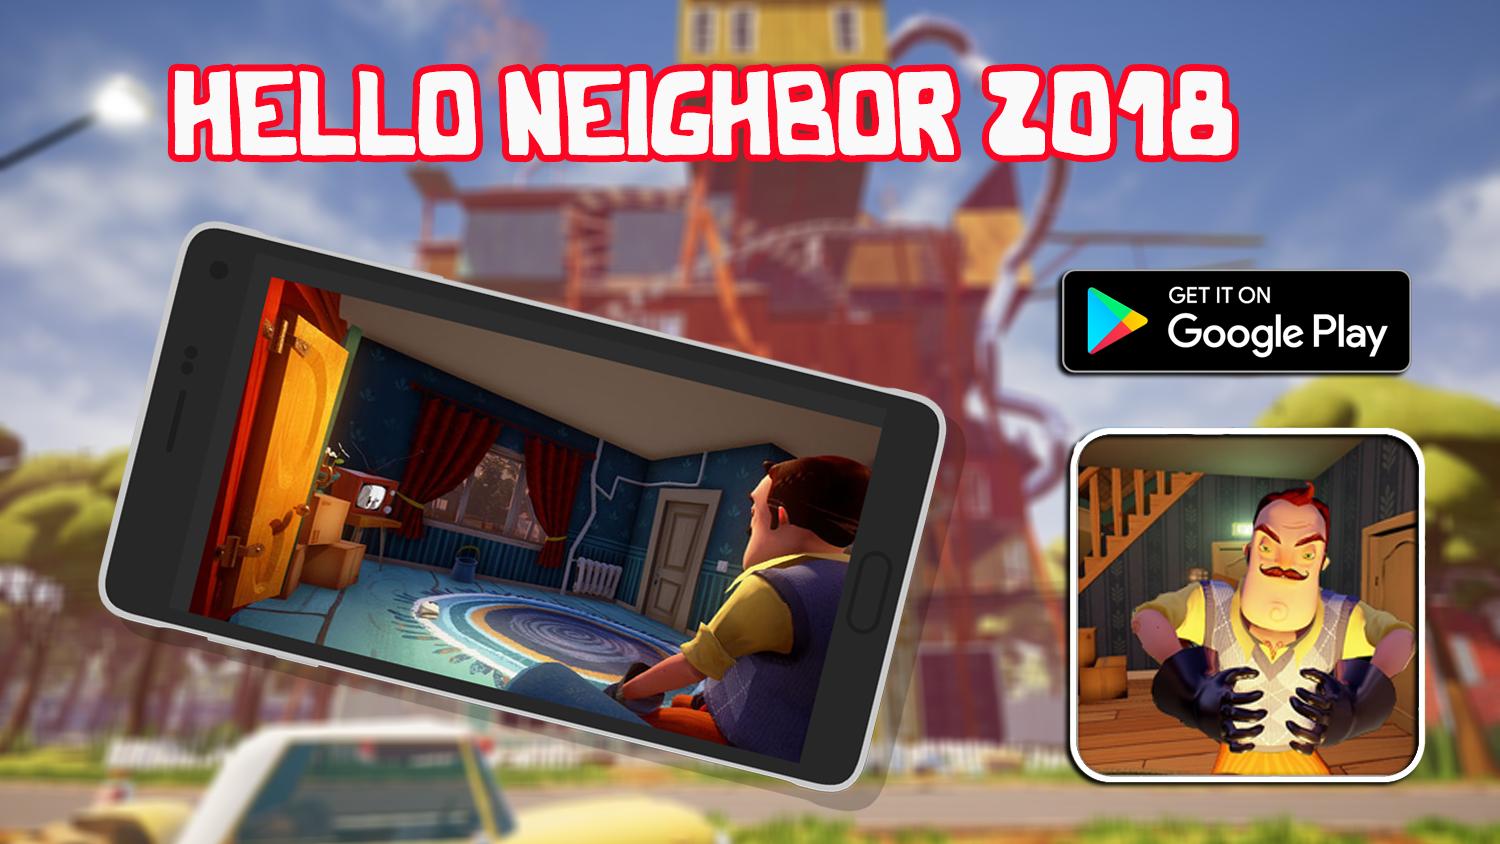 New Guide Hello Neighbor Roblox 2018 Game For Android Apk Download - guide hello neighbor roblox 10 apk download android